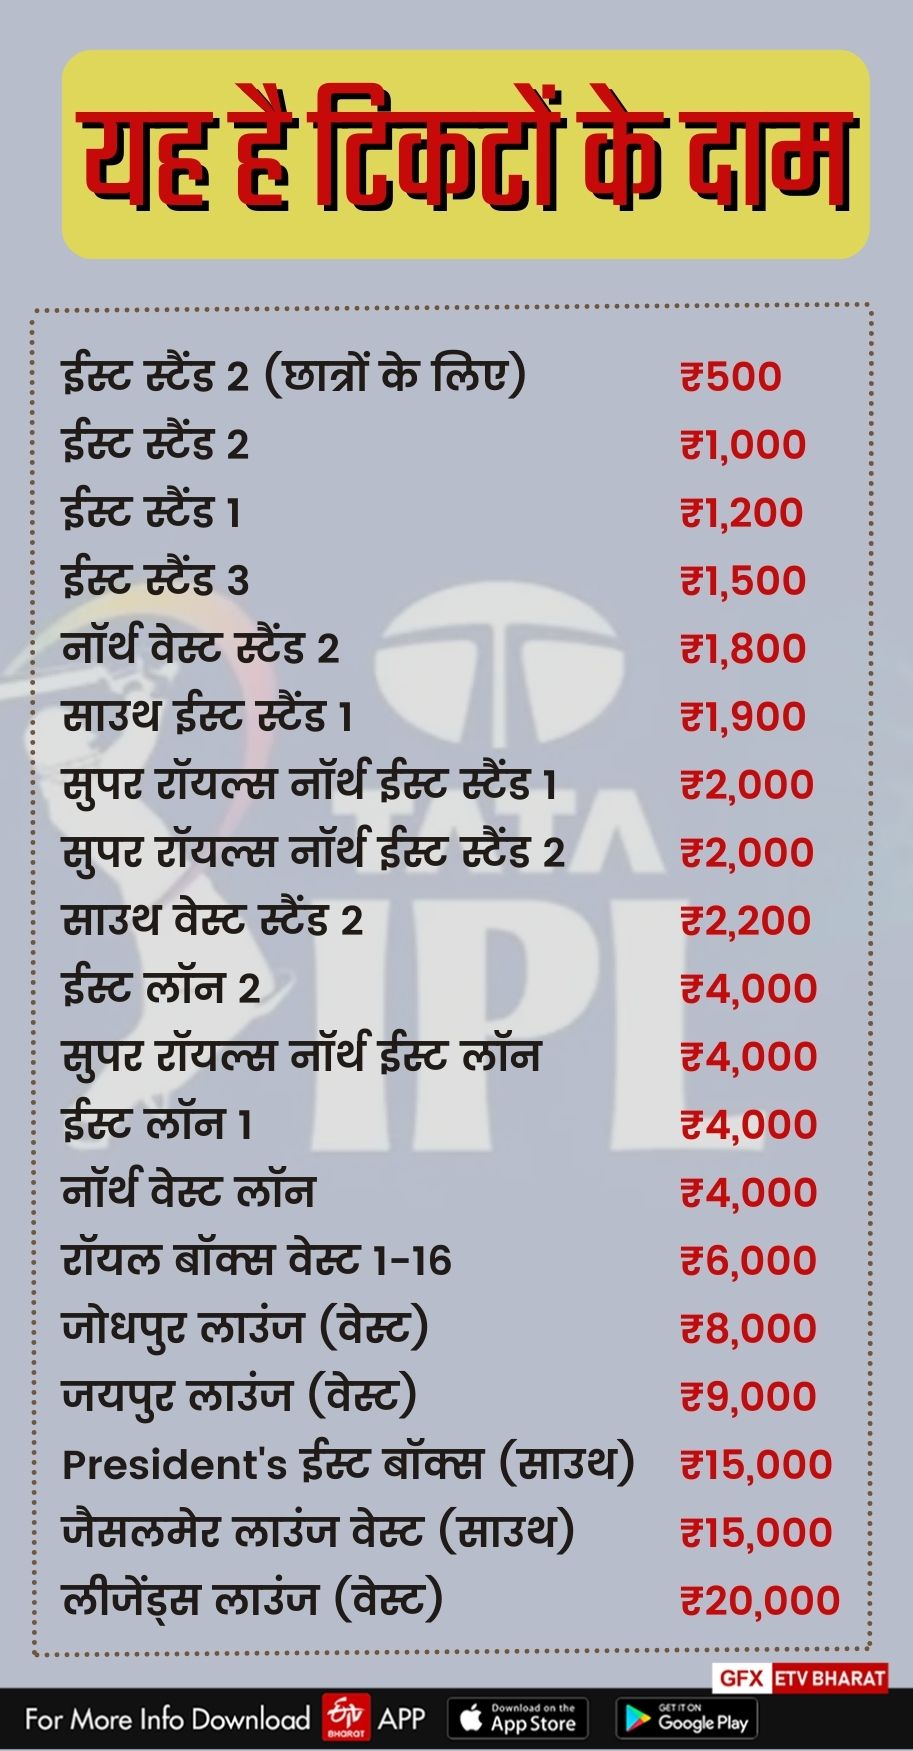 ticket rates for students in IPL